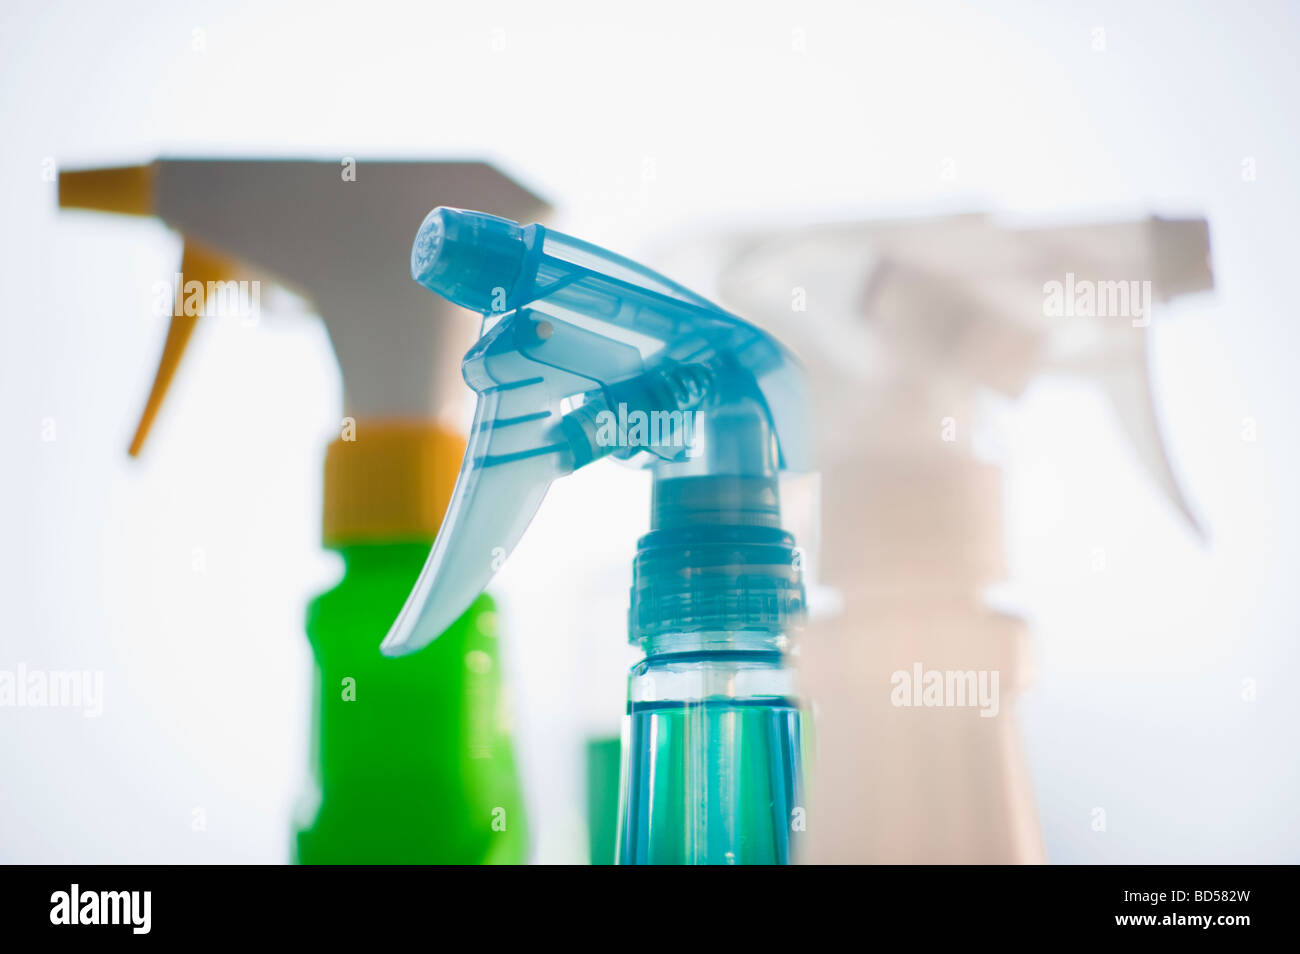 Cleaning supplies Stock Photo